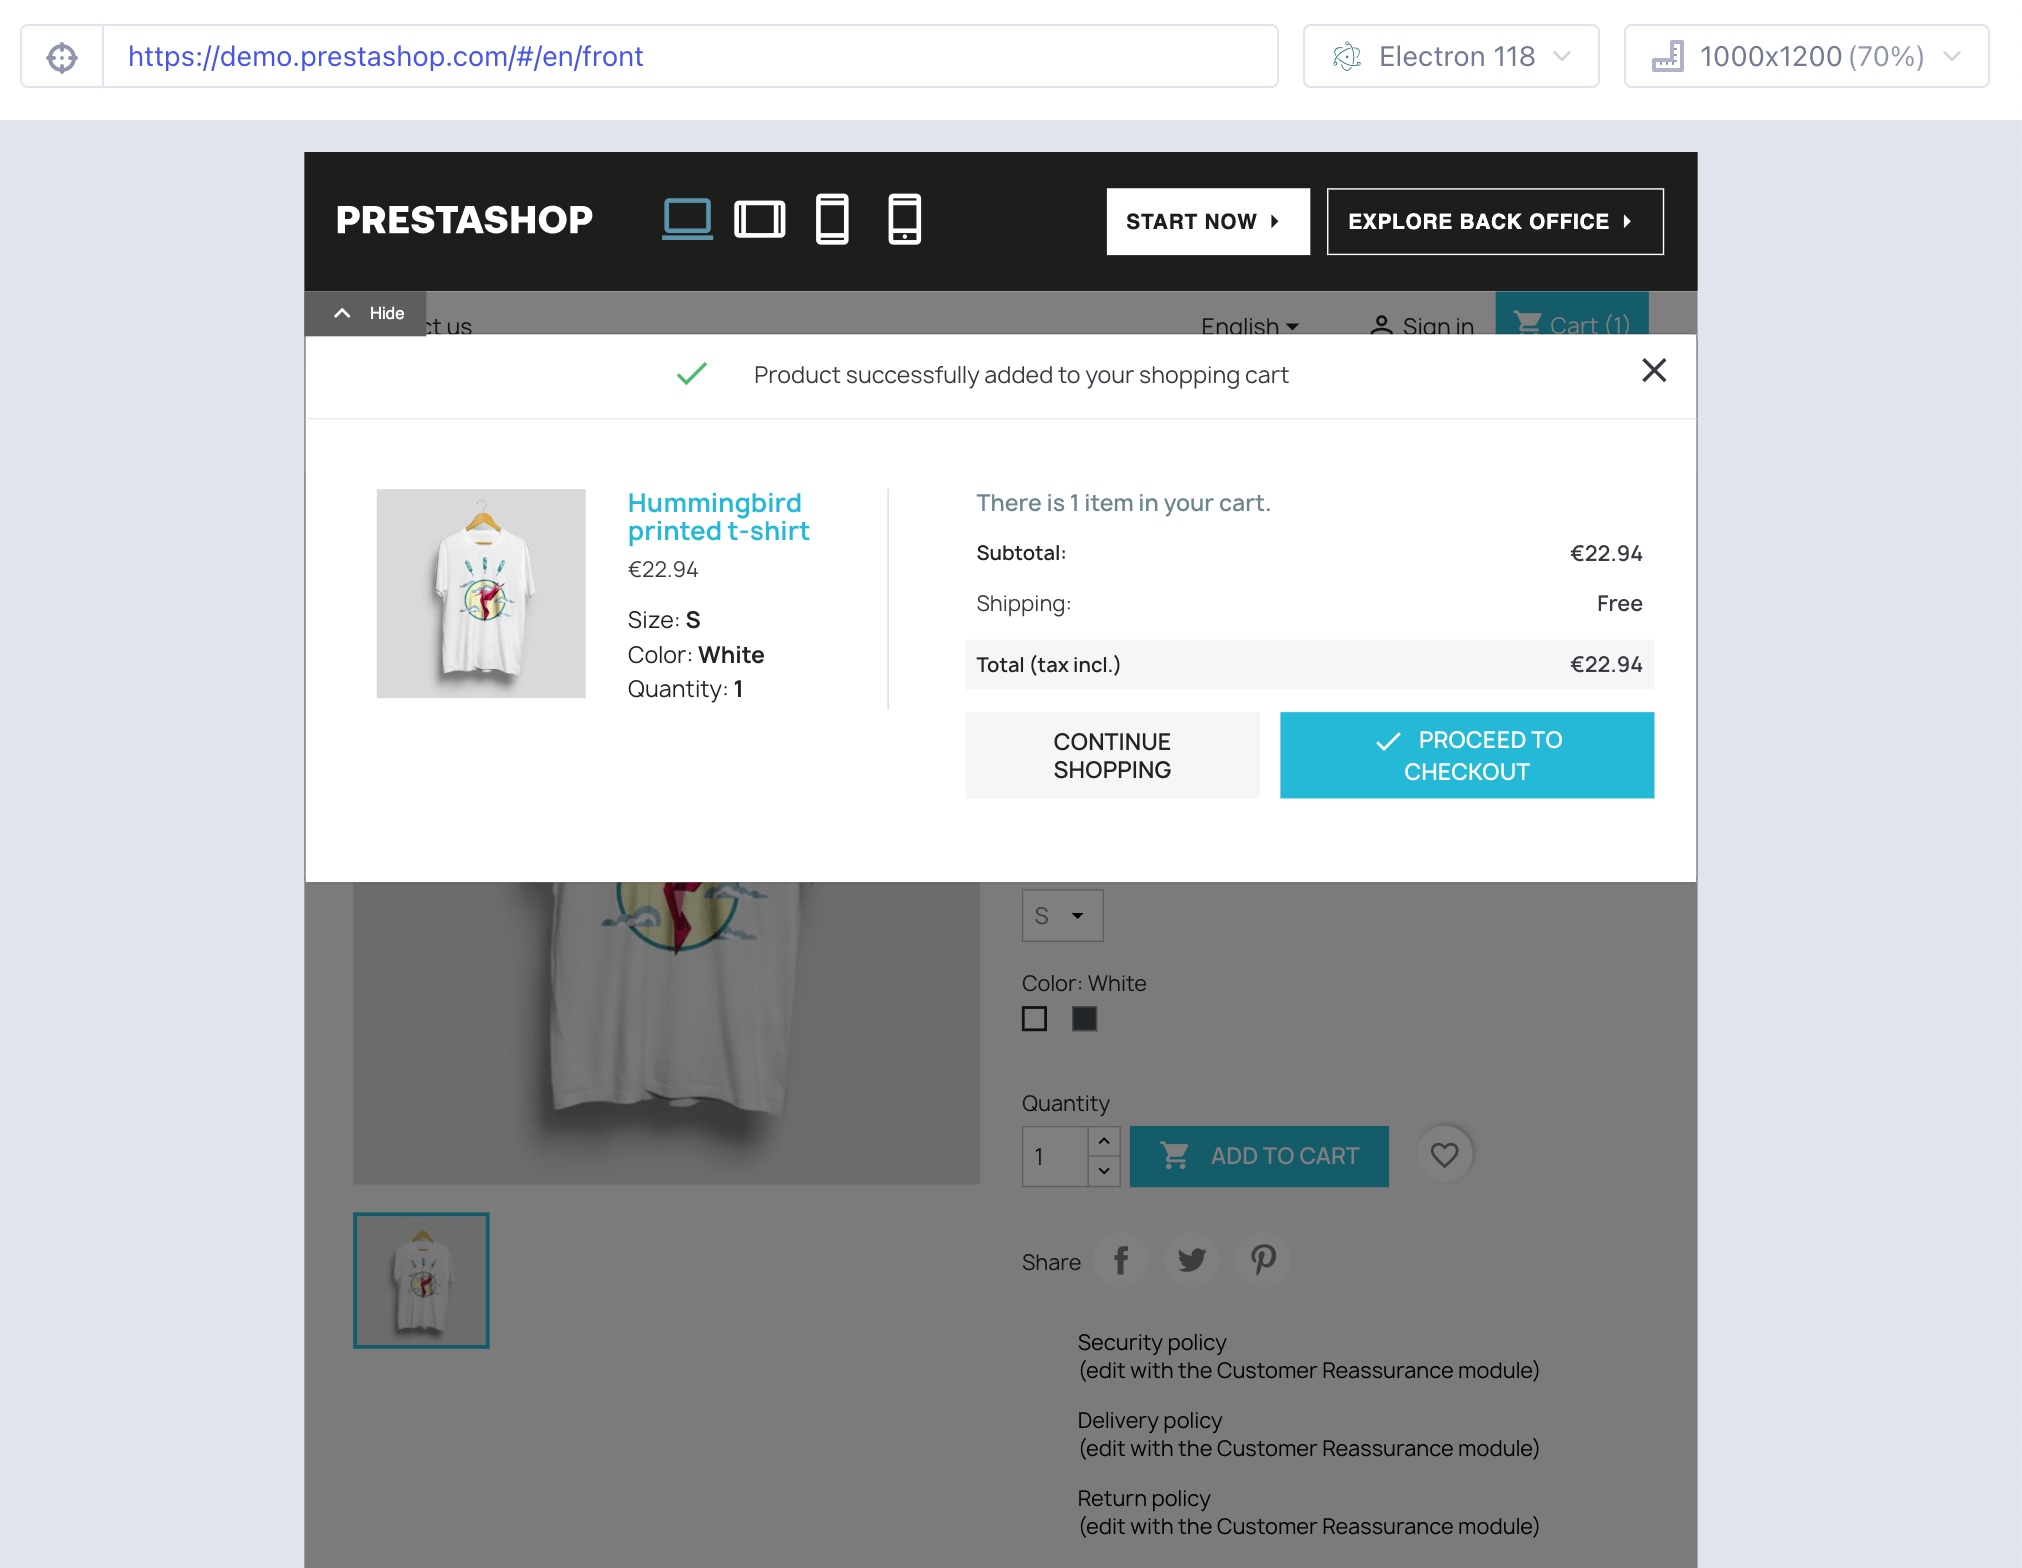 The item was added to cart